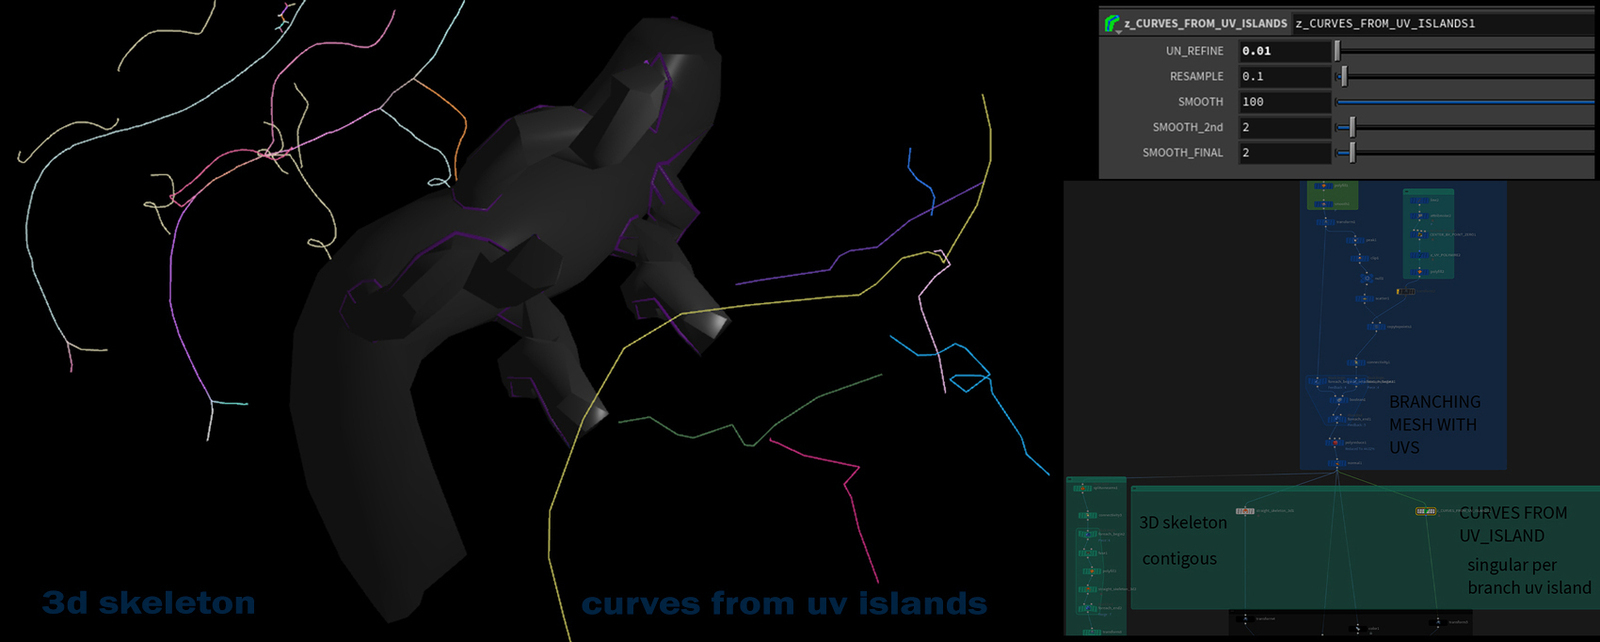 z_CURVES_FROM_UV_ISLANDS